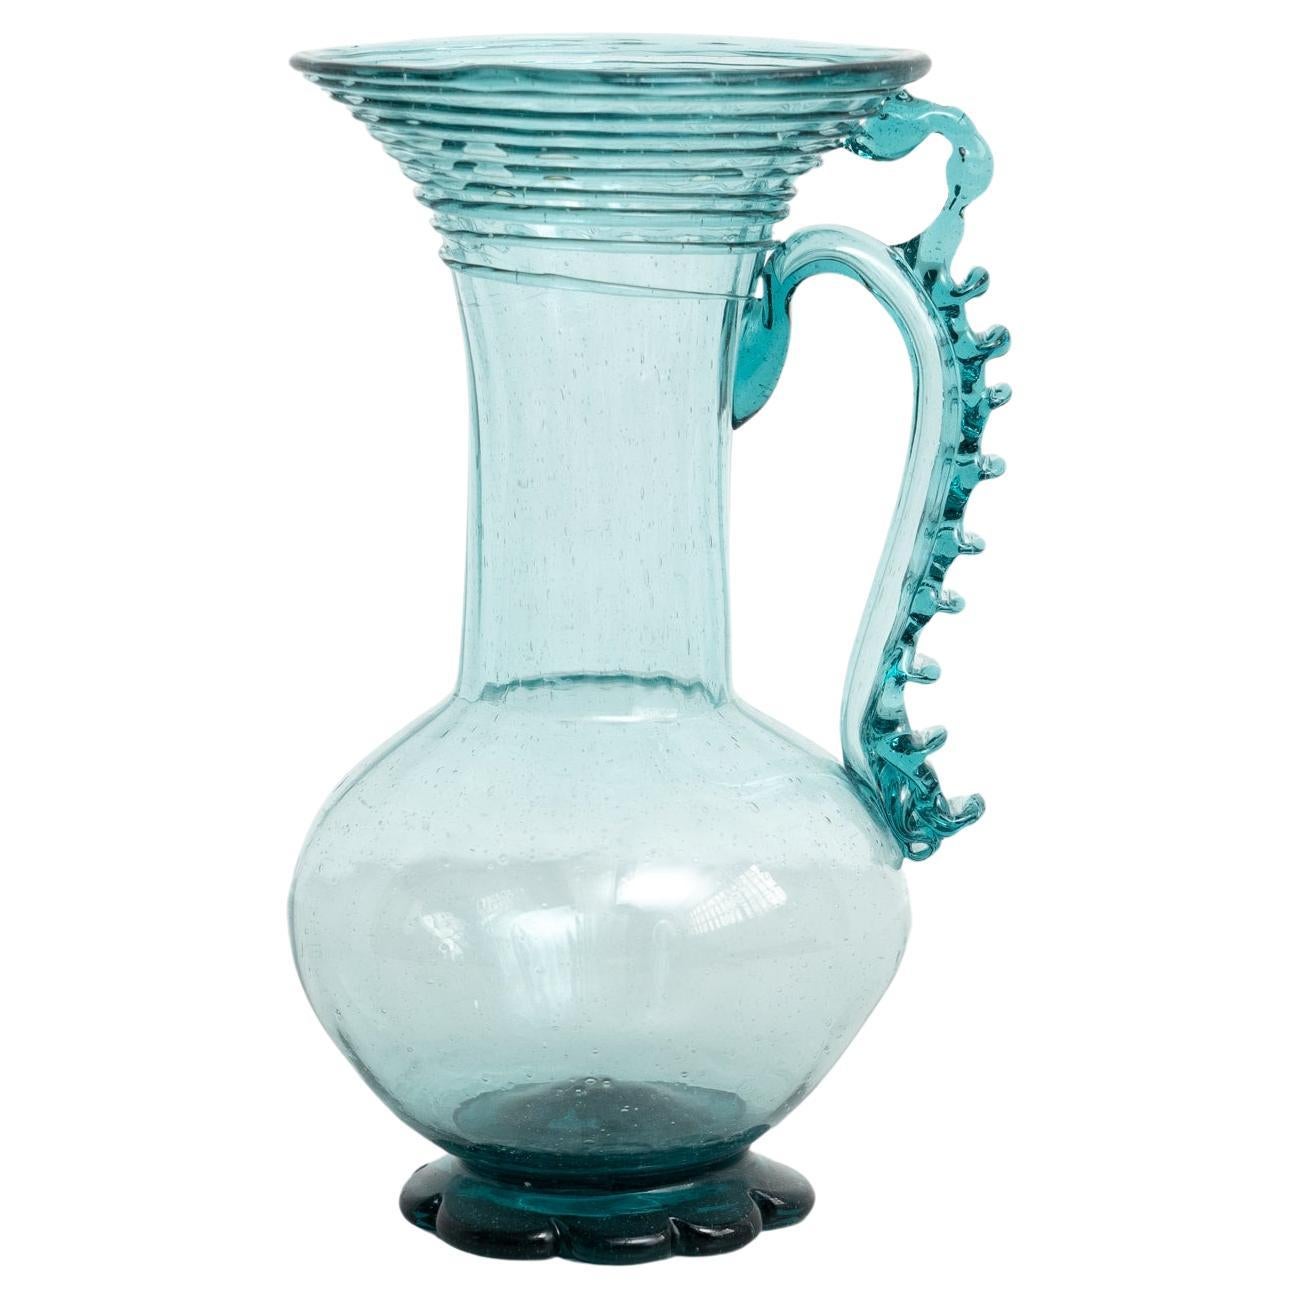 Exceptional Blown Glass Vase - Early XXth Century - Spanish Craftsmanship For Sale